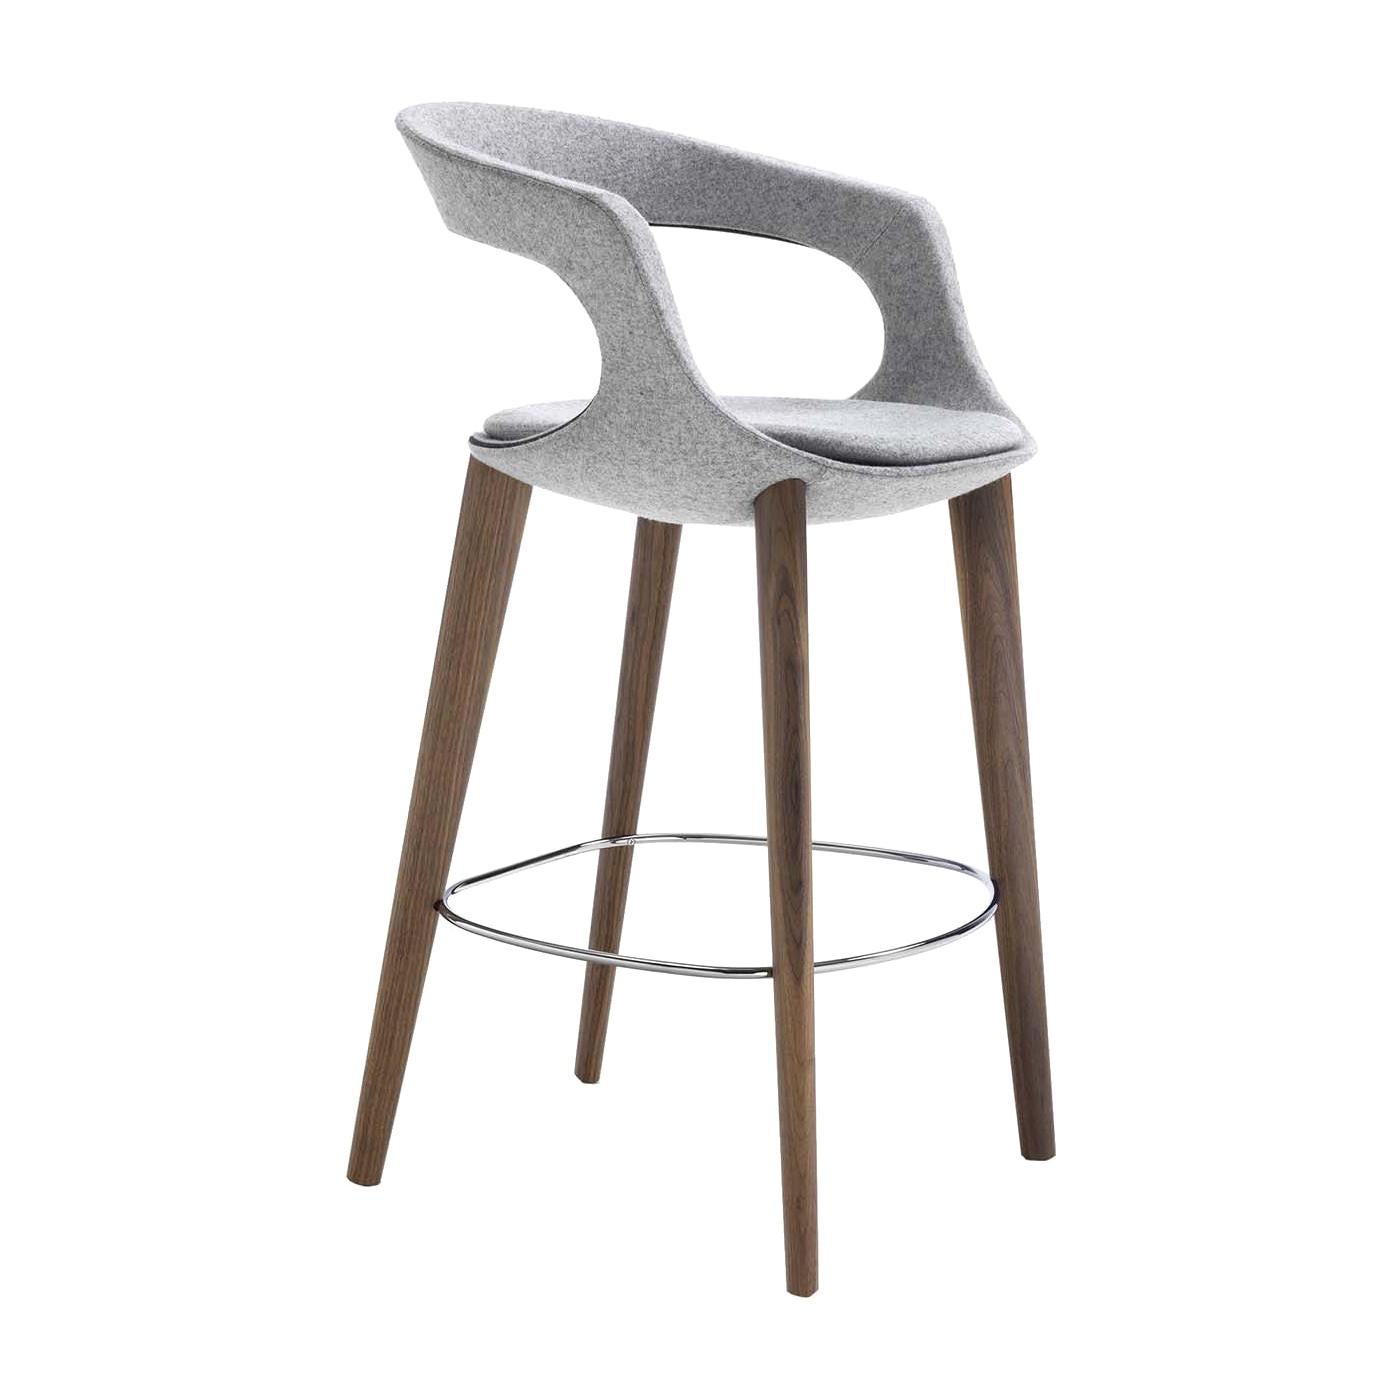 Frenchkiss Low-Back Counter Stool by Stefano Bigi